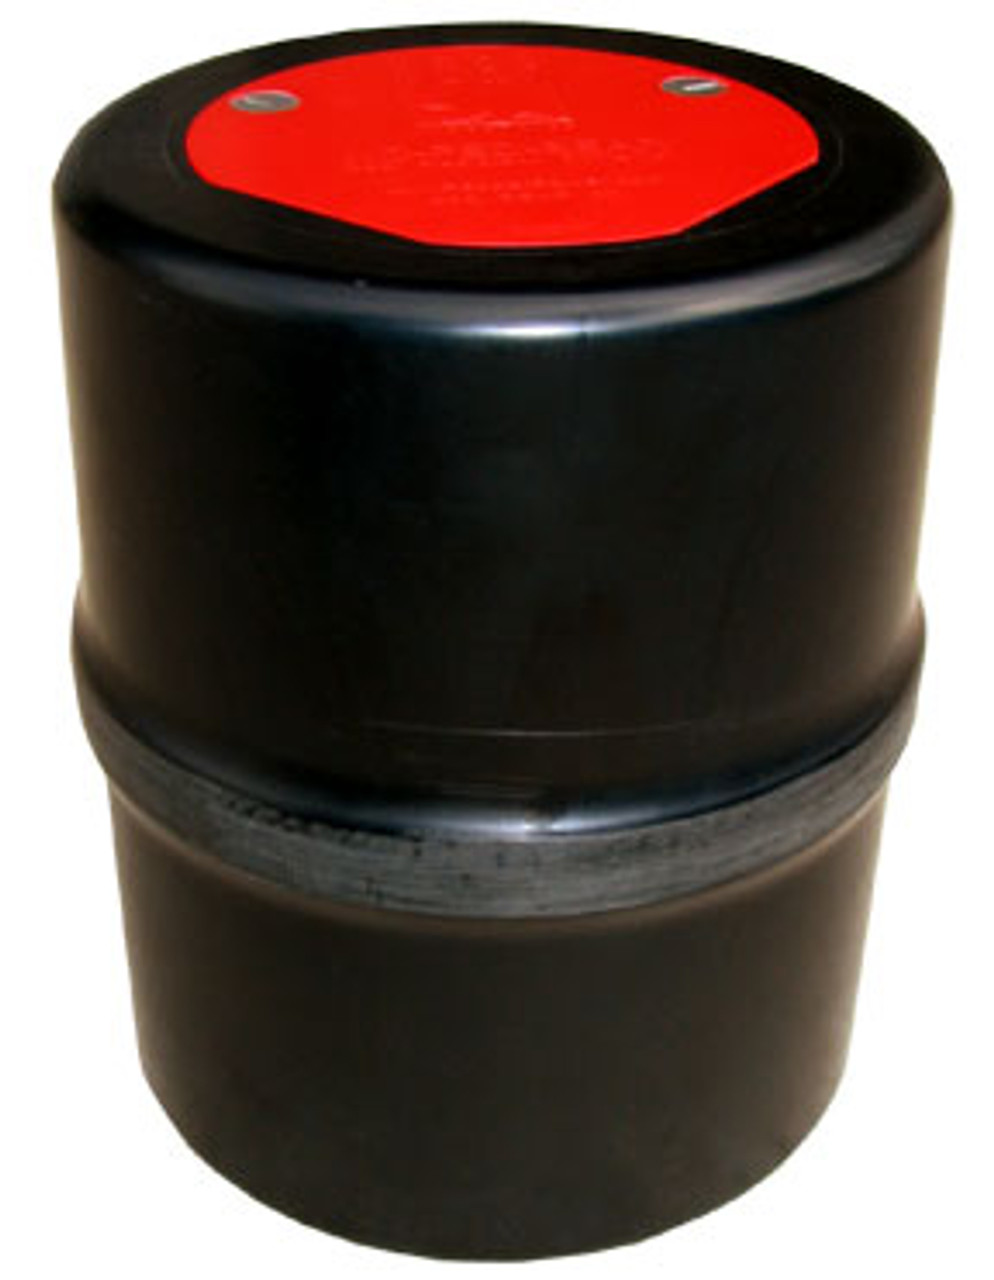 Udap #BRCWC NO-FED-BEAR Bear Resistant Canister with Case